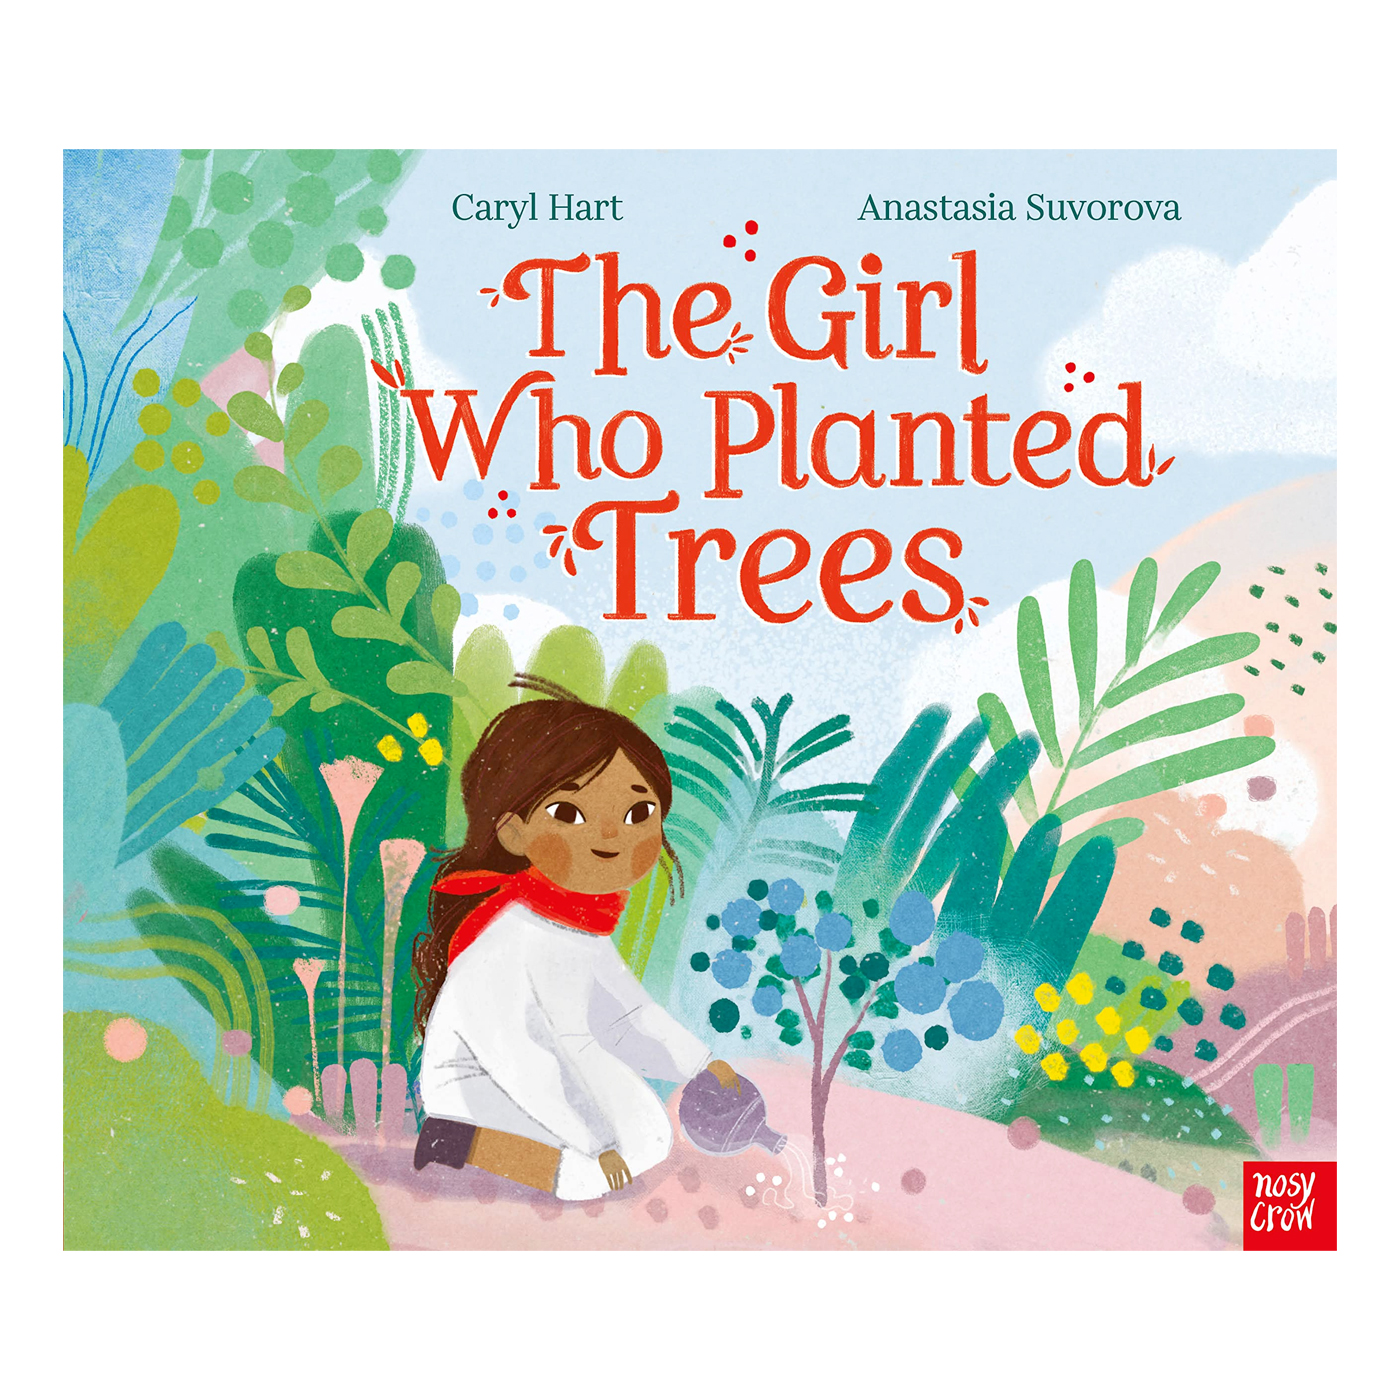  The Girl Who Planted Trees